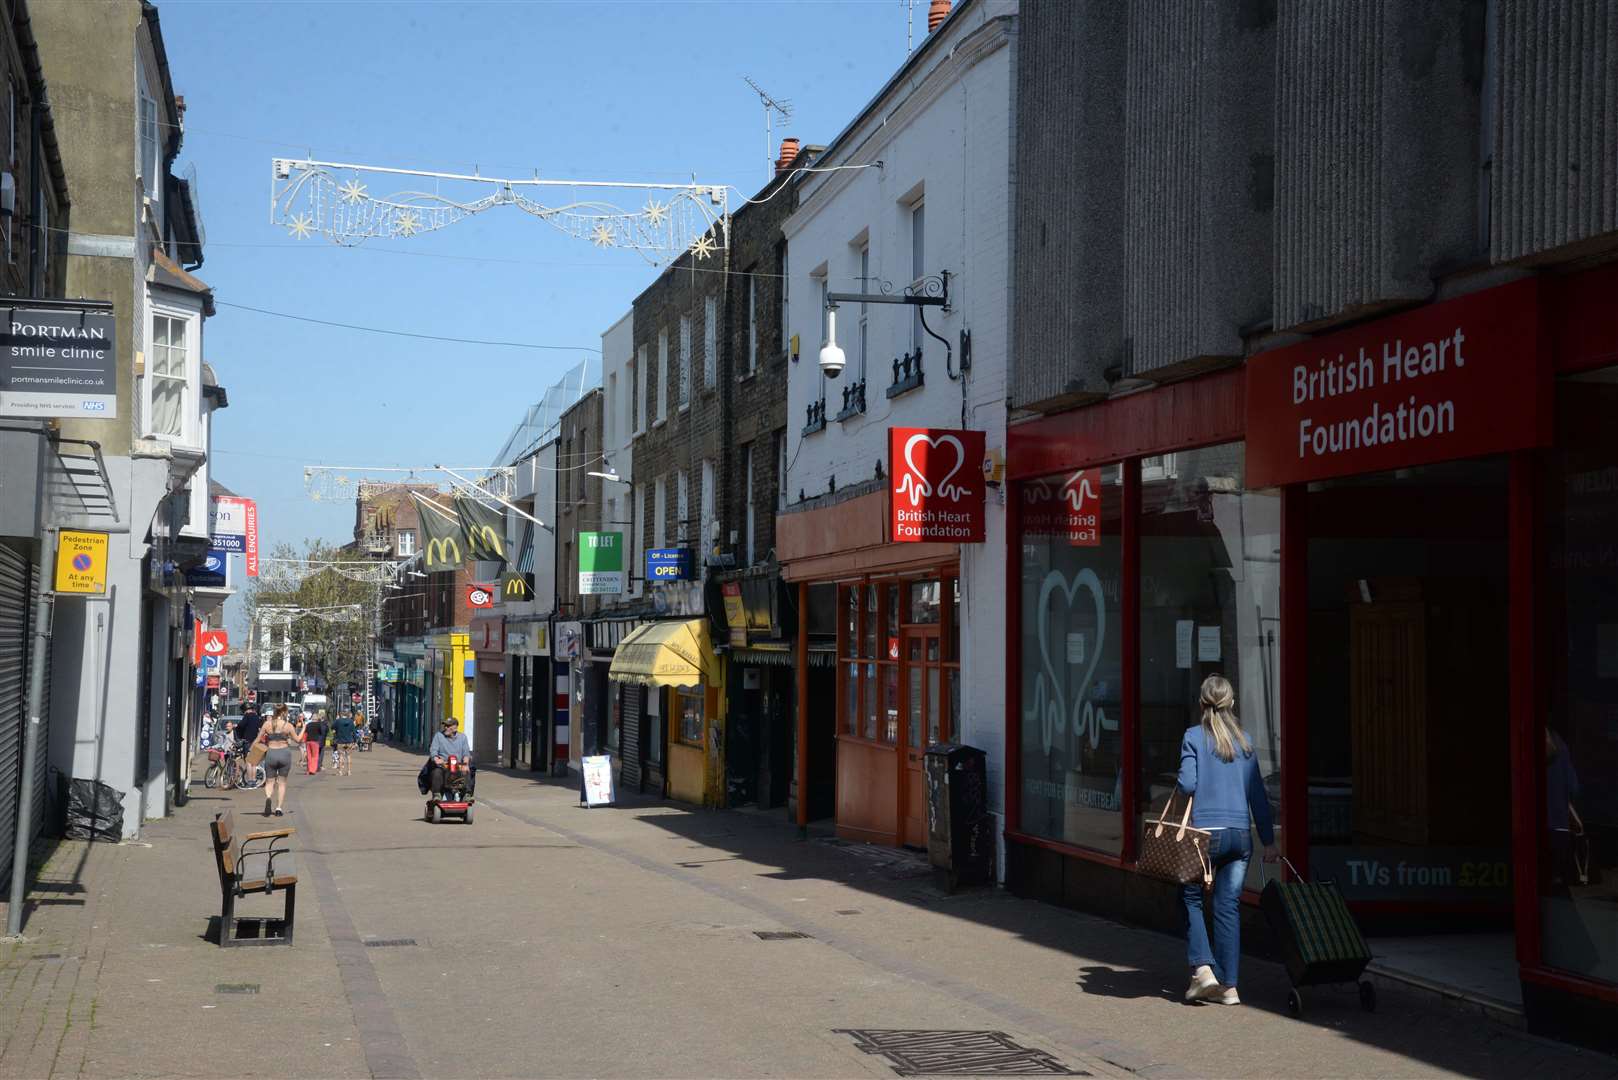 The attack happened in Margate High Street. Picture: Chris Davey